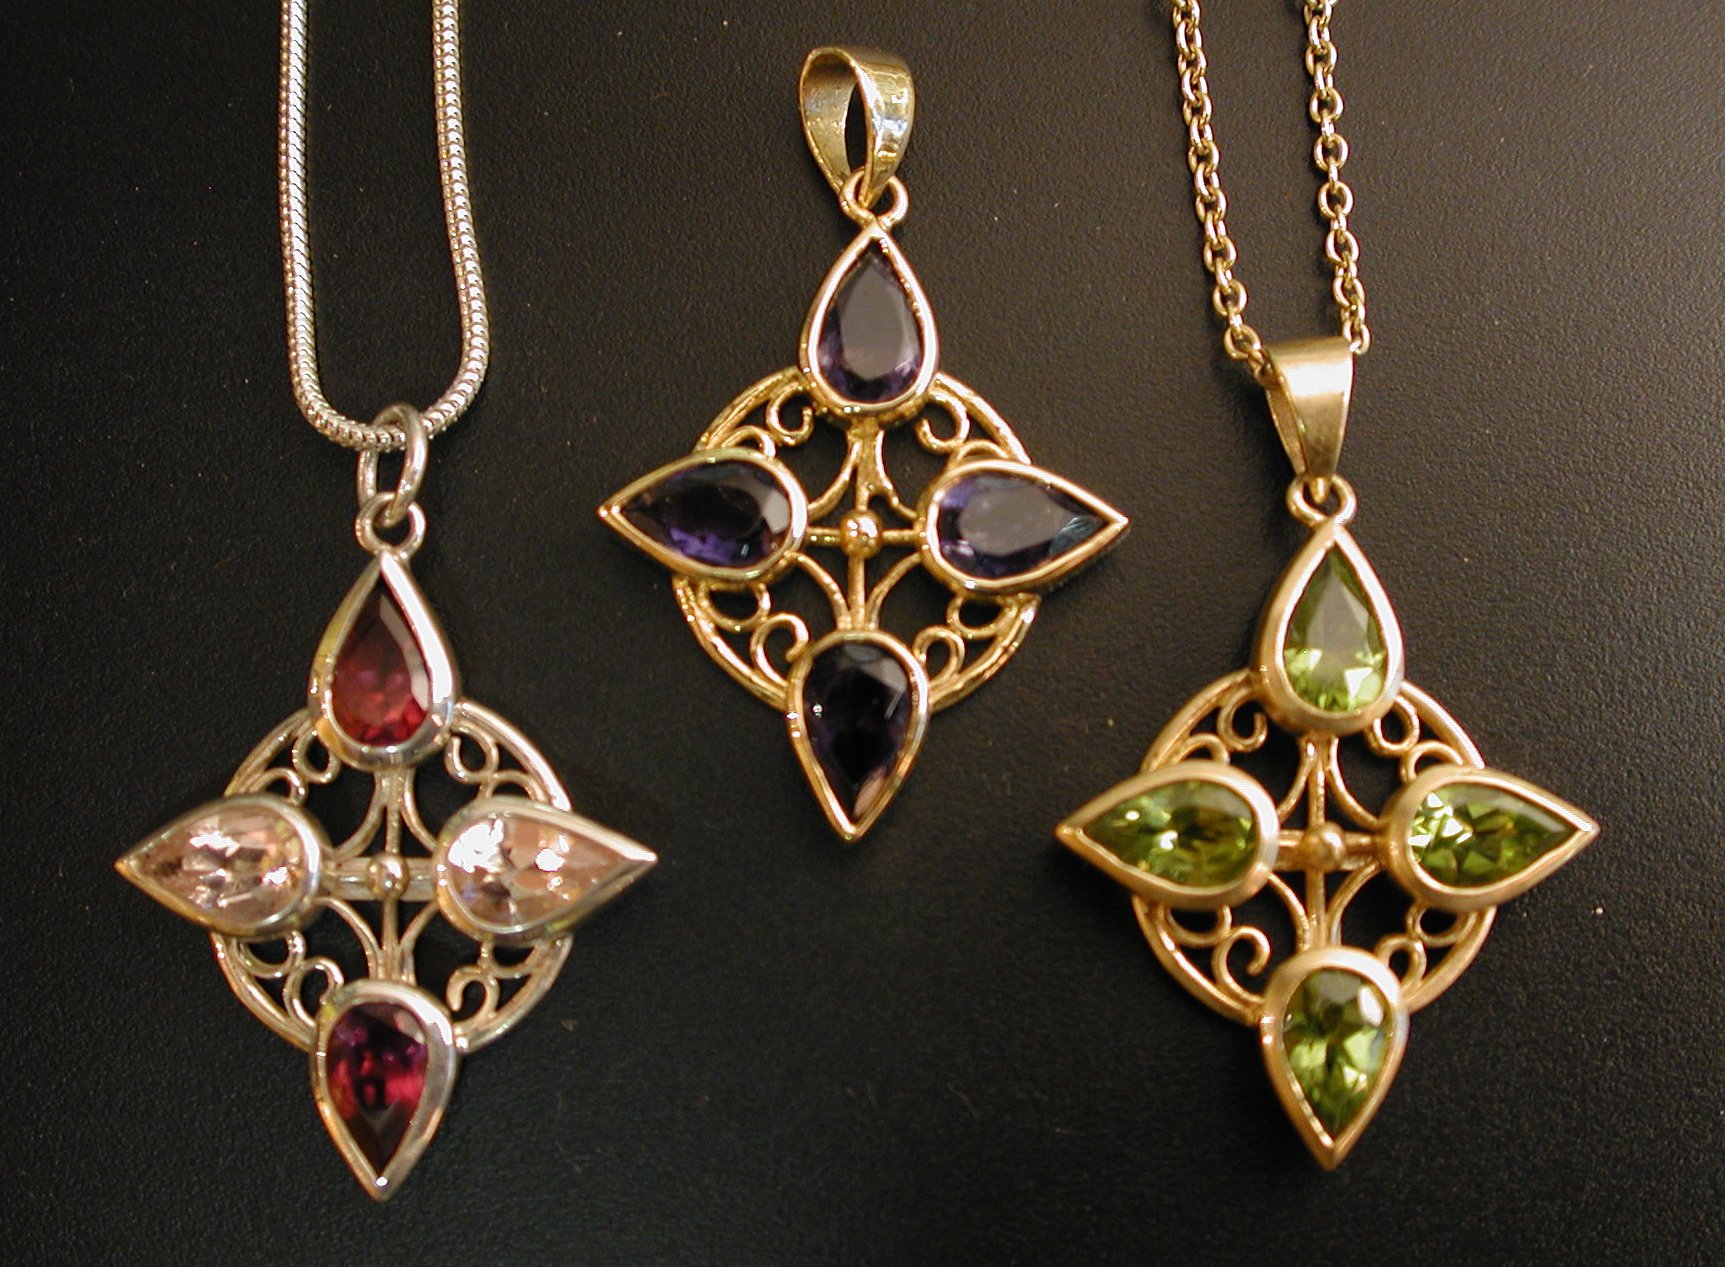 6 Steps to Soldering Jewelry